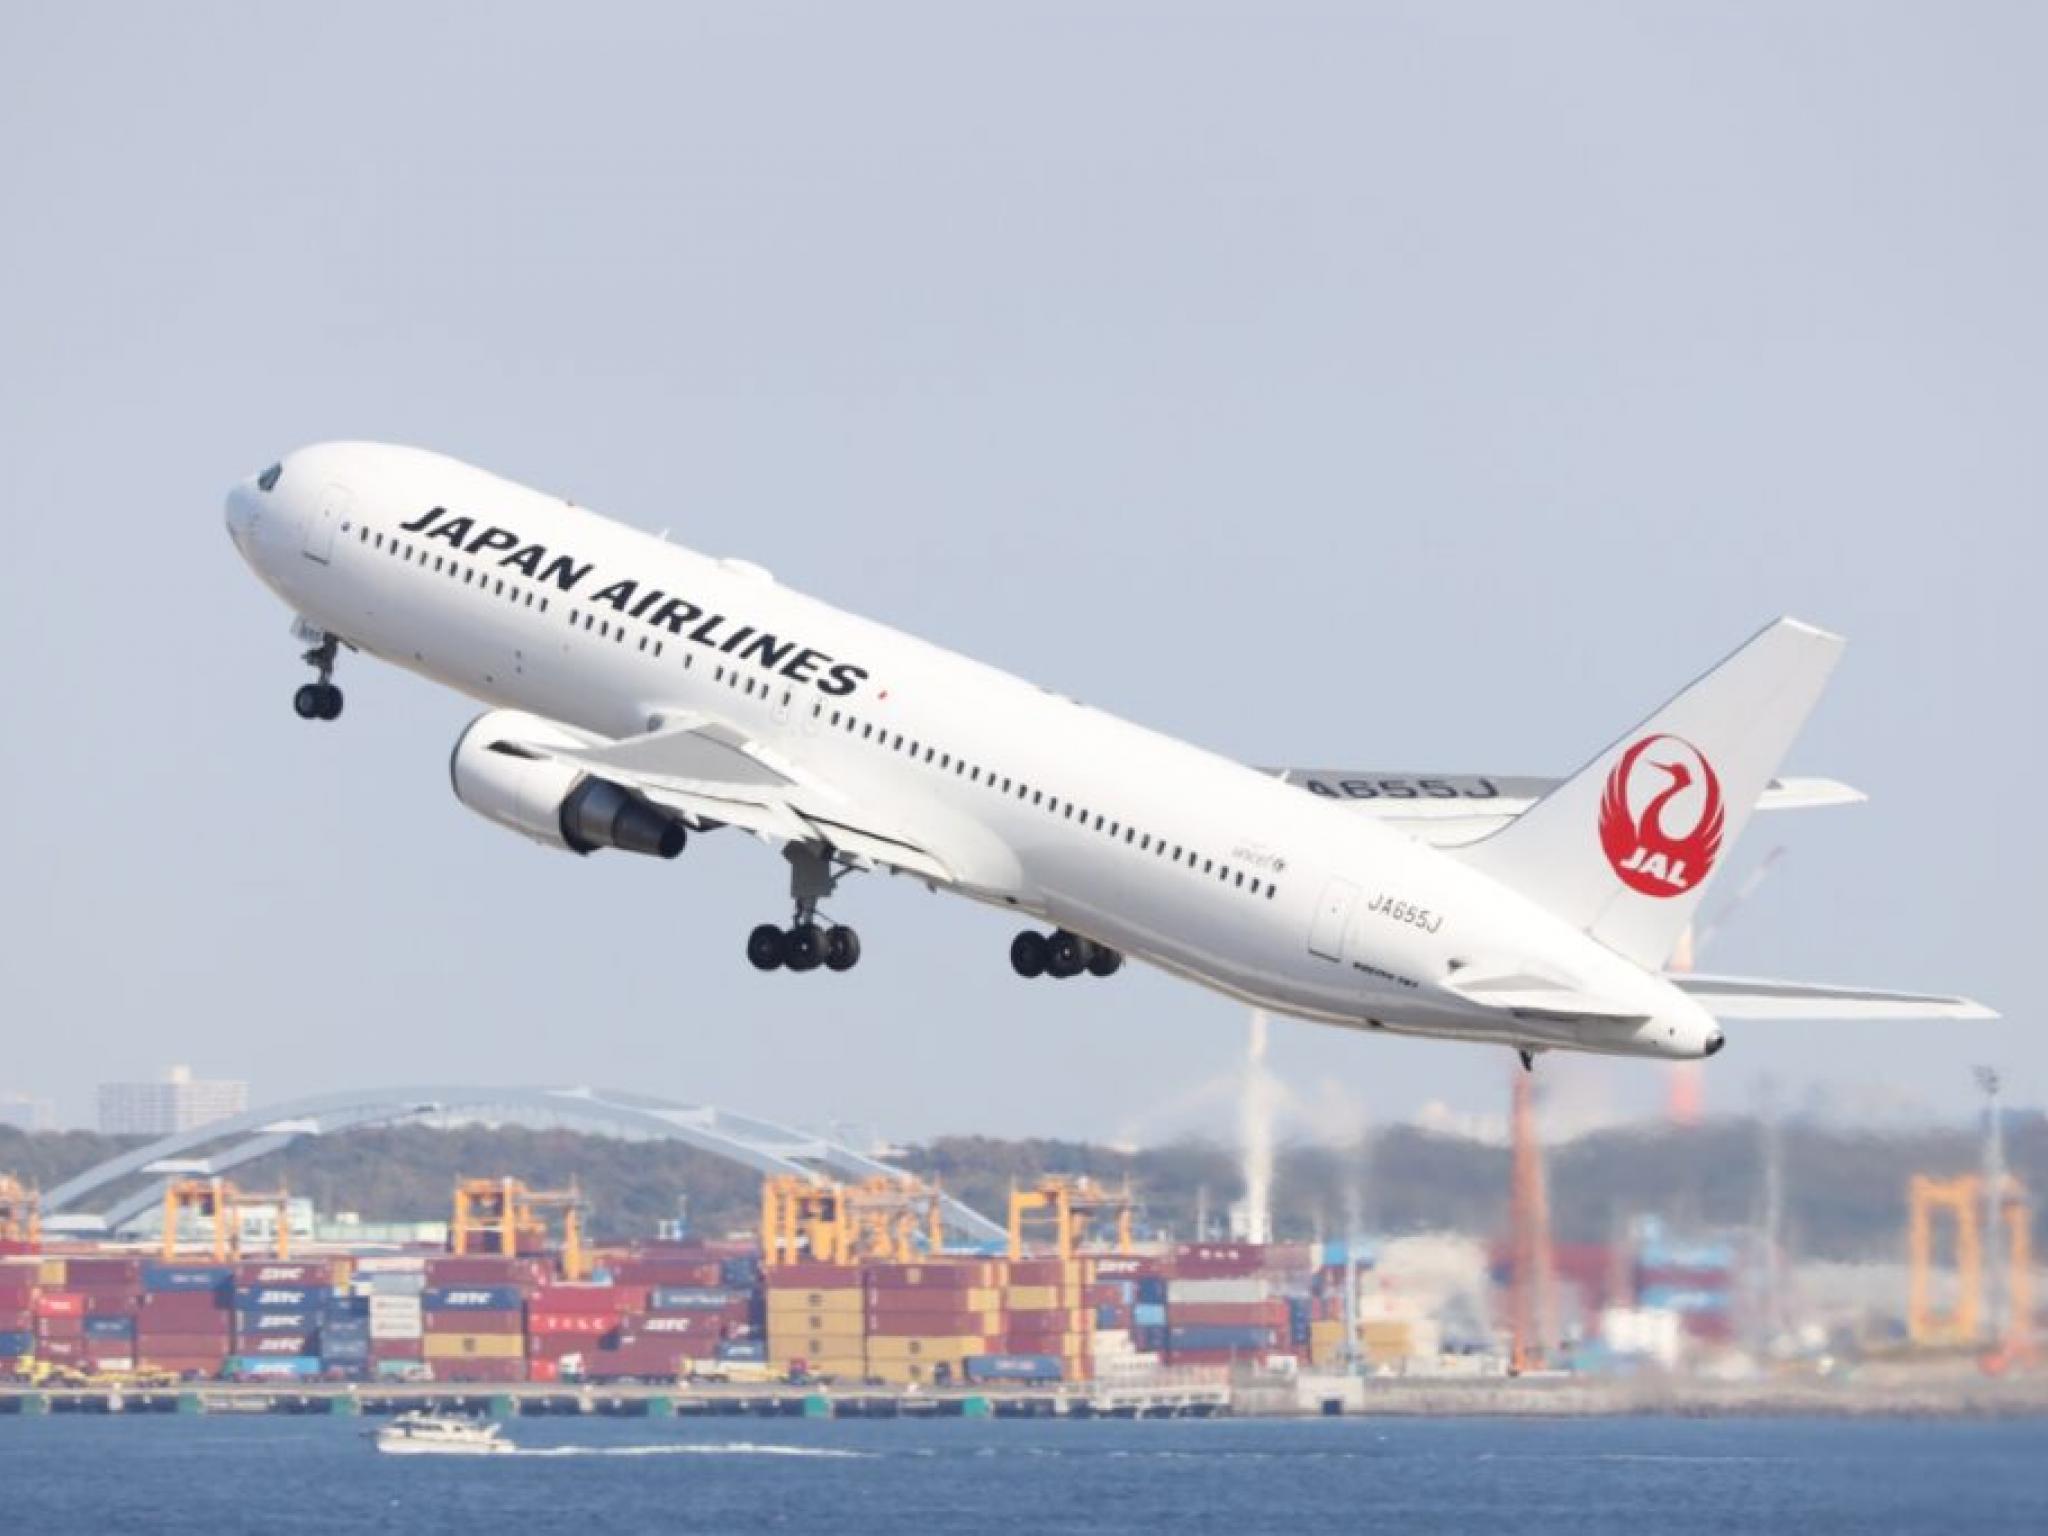  japan-airlines-faces-over-100m-loss-after-tragic-plane-collision-at-haneda-airport 